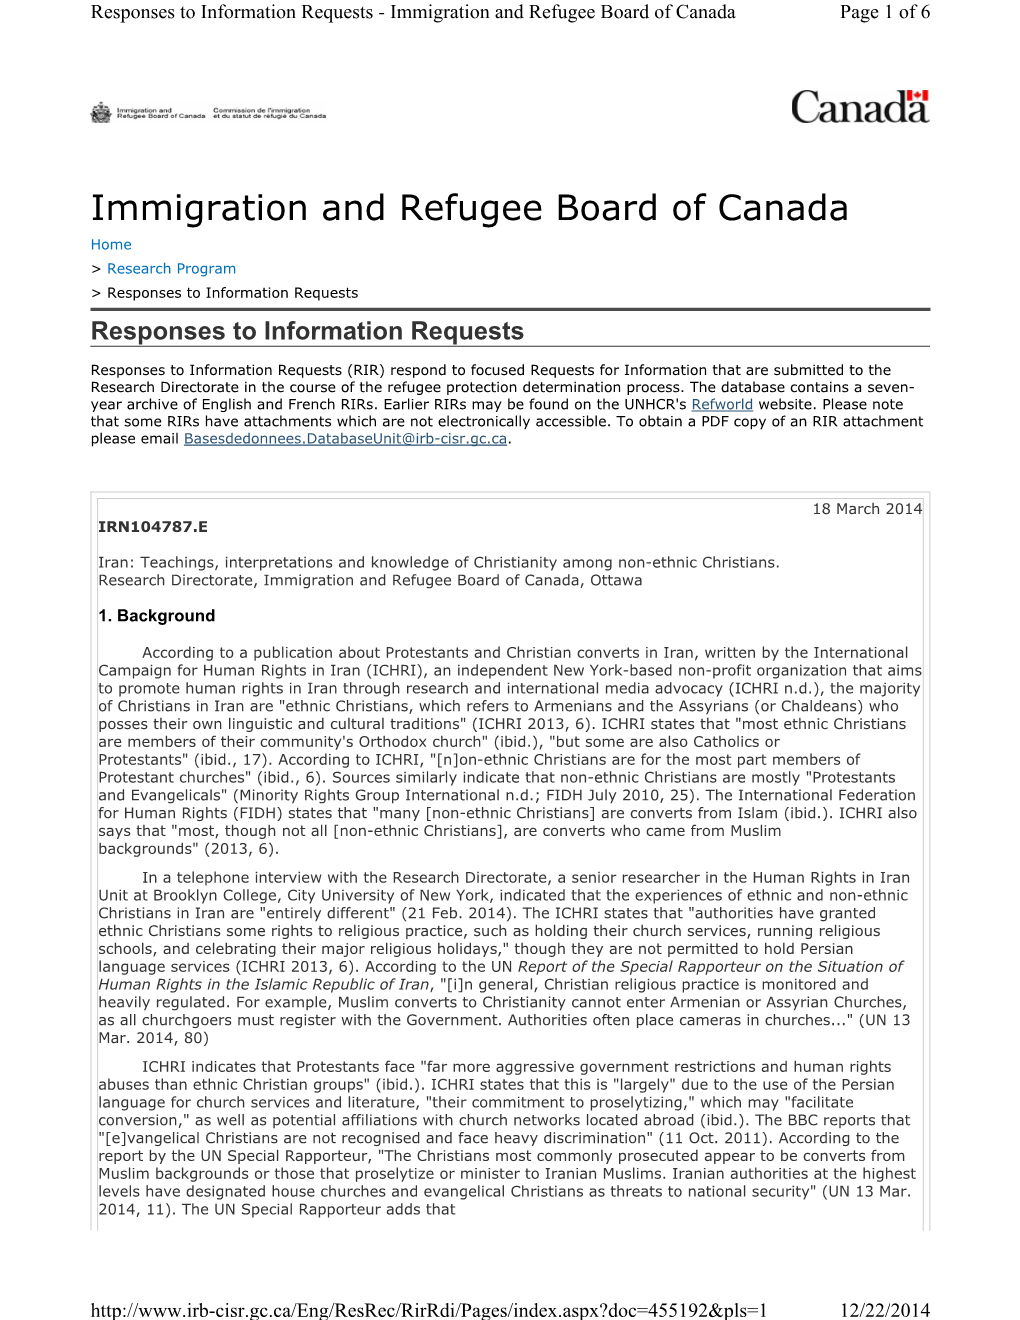 Teachings, Interpretations and Knowledge of Christianity Among Non-Ethnic Christians. Research Directorate, Immigration and Refugee Board of Canada, Ottawa